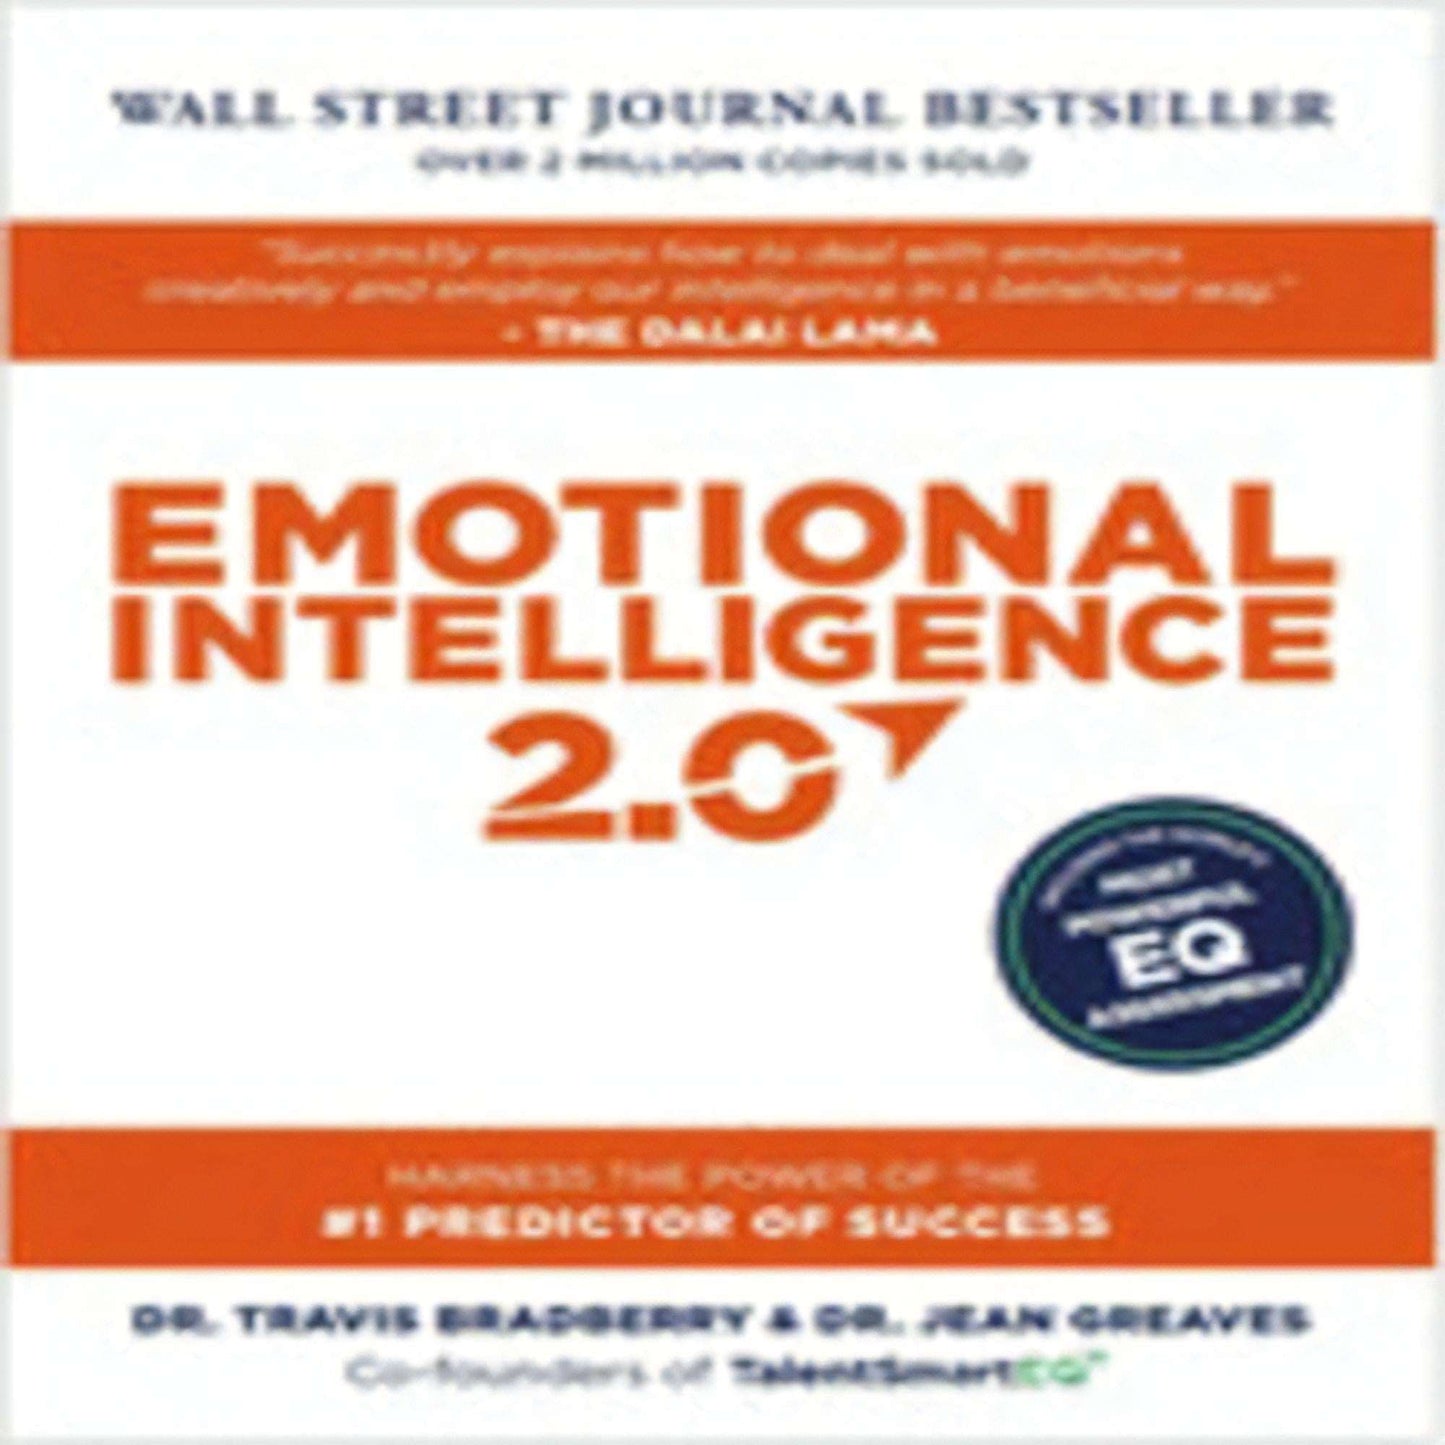 TEXTBOOK Emotional Intelligence 2.0: With Access Code734-050623-9780974320625DPGBOOKSTORE.COM. Today's Bestsellers.